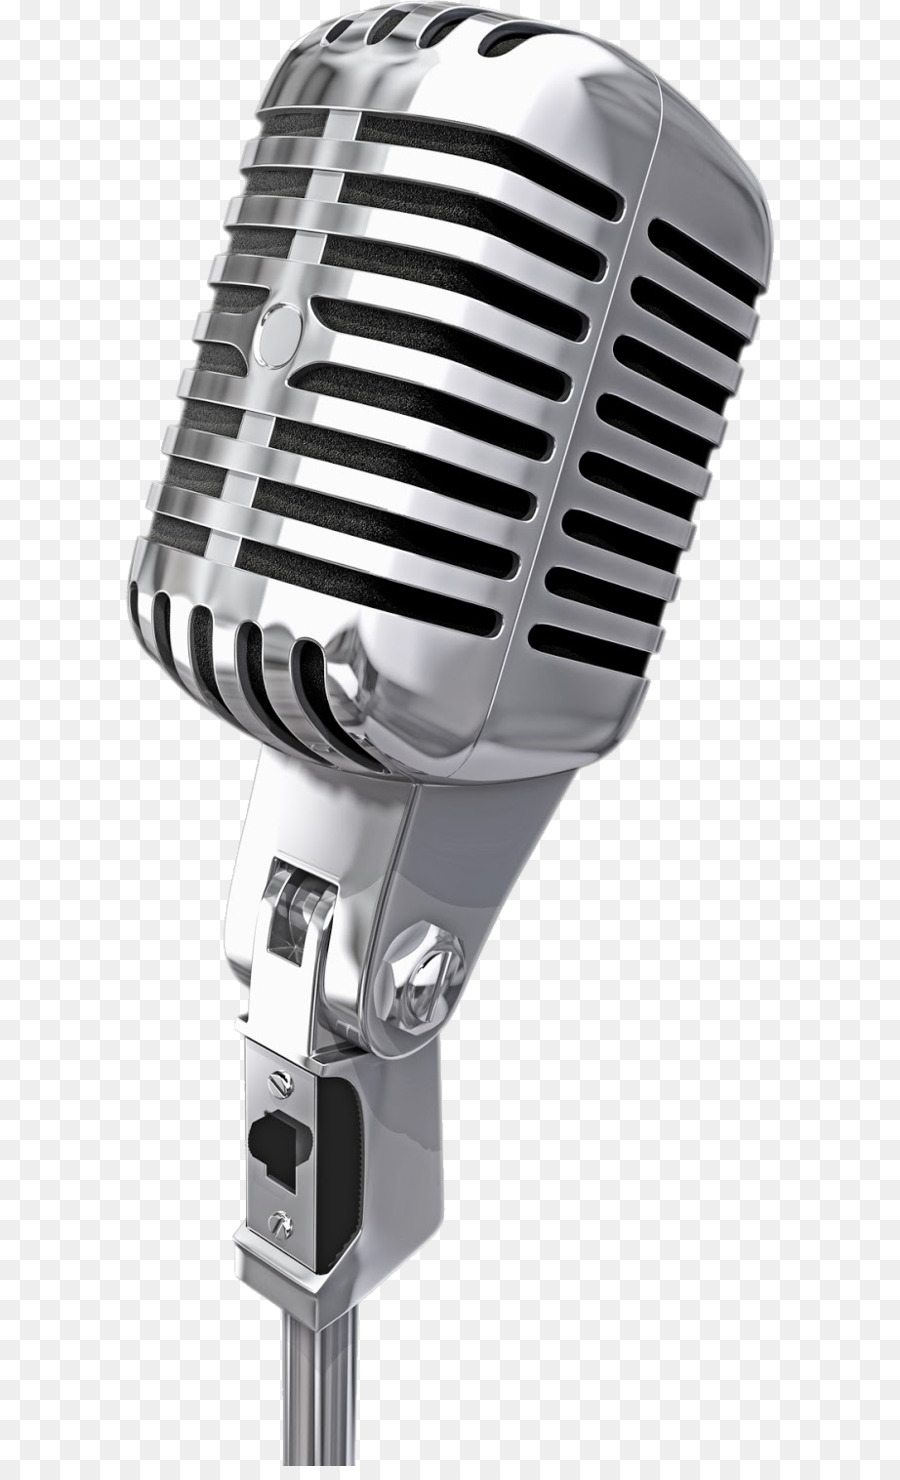 Microphone Clip art - Microphone PNG image png download - 666*1502 - Free Transparent Microphone png Download.